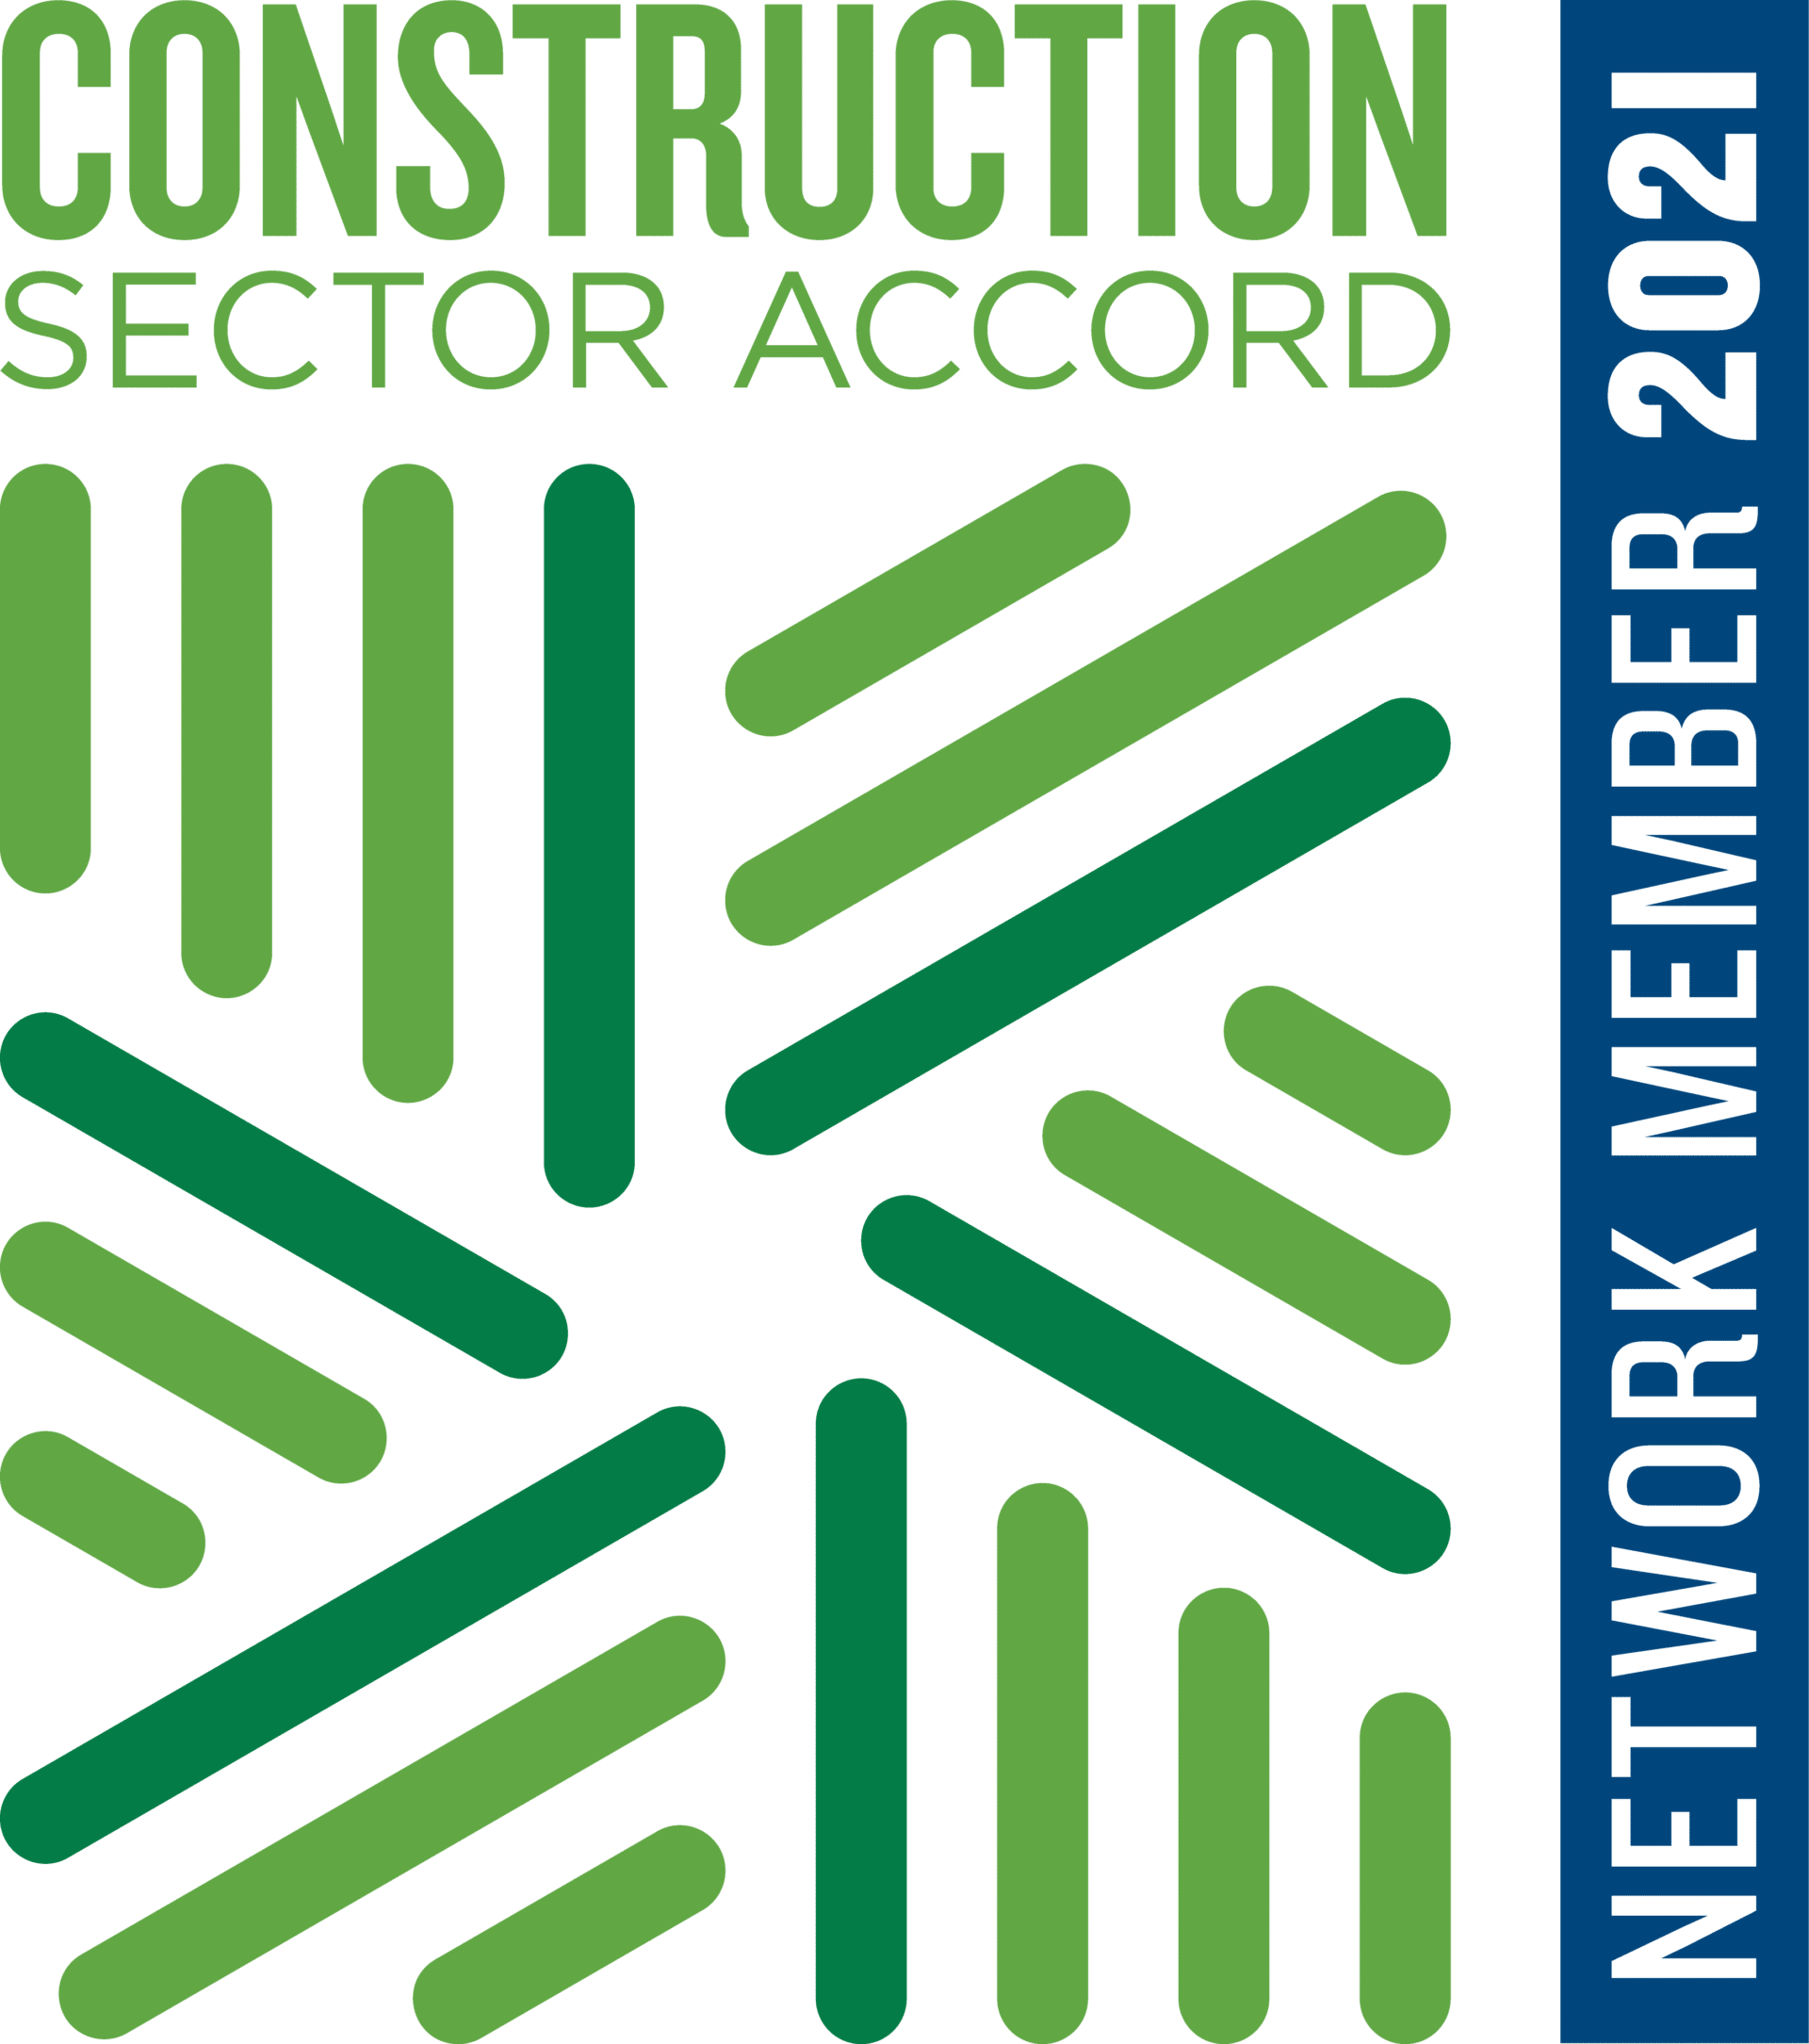 Construction Sector Accord member